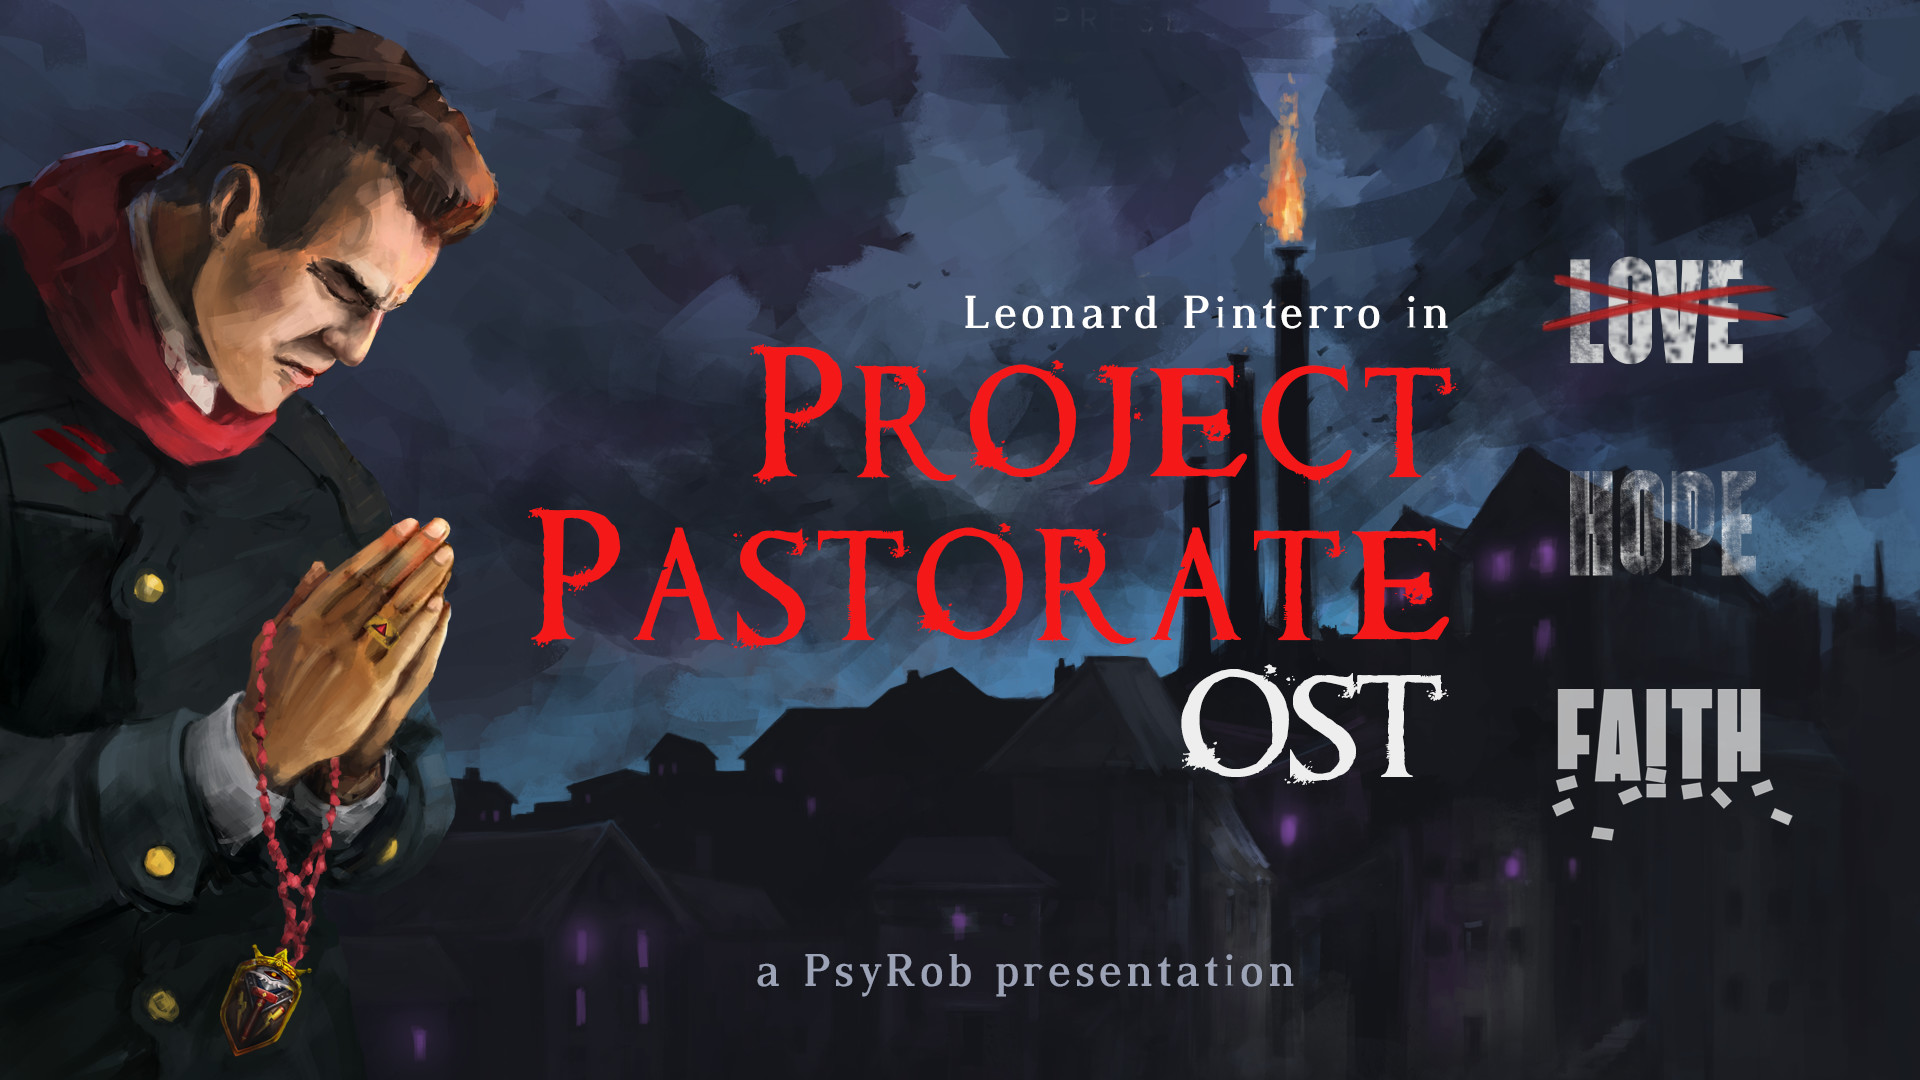 Project Pastorate OST Featured Screenshot #1